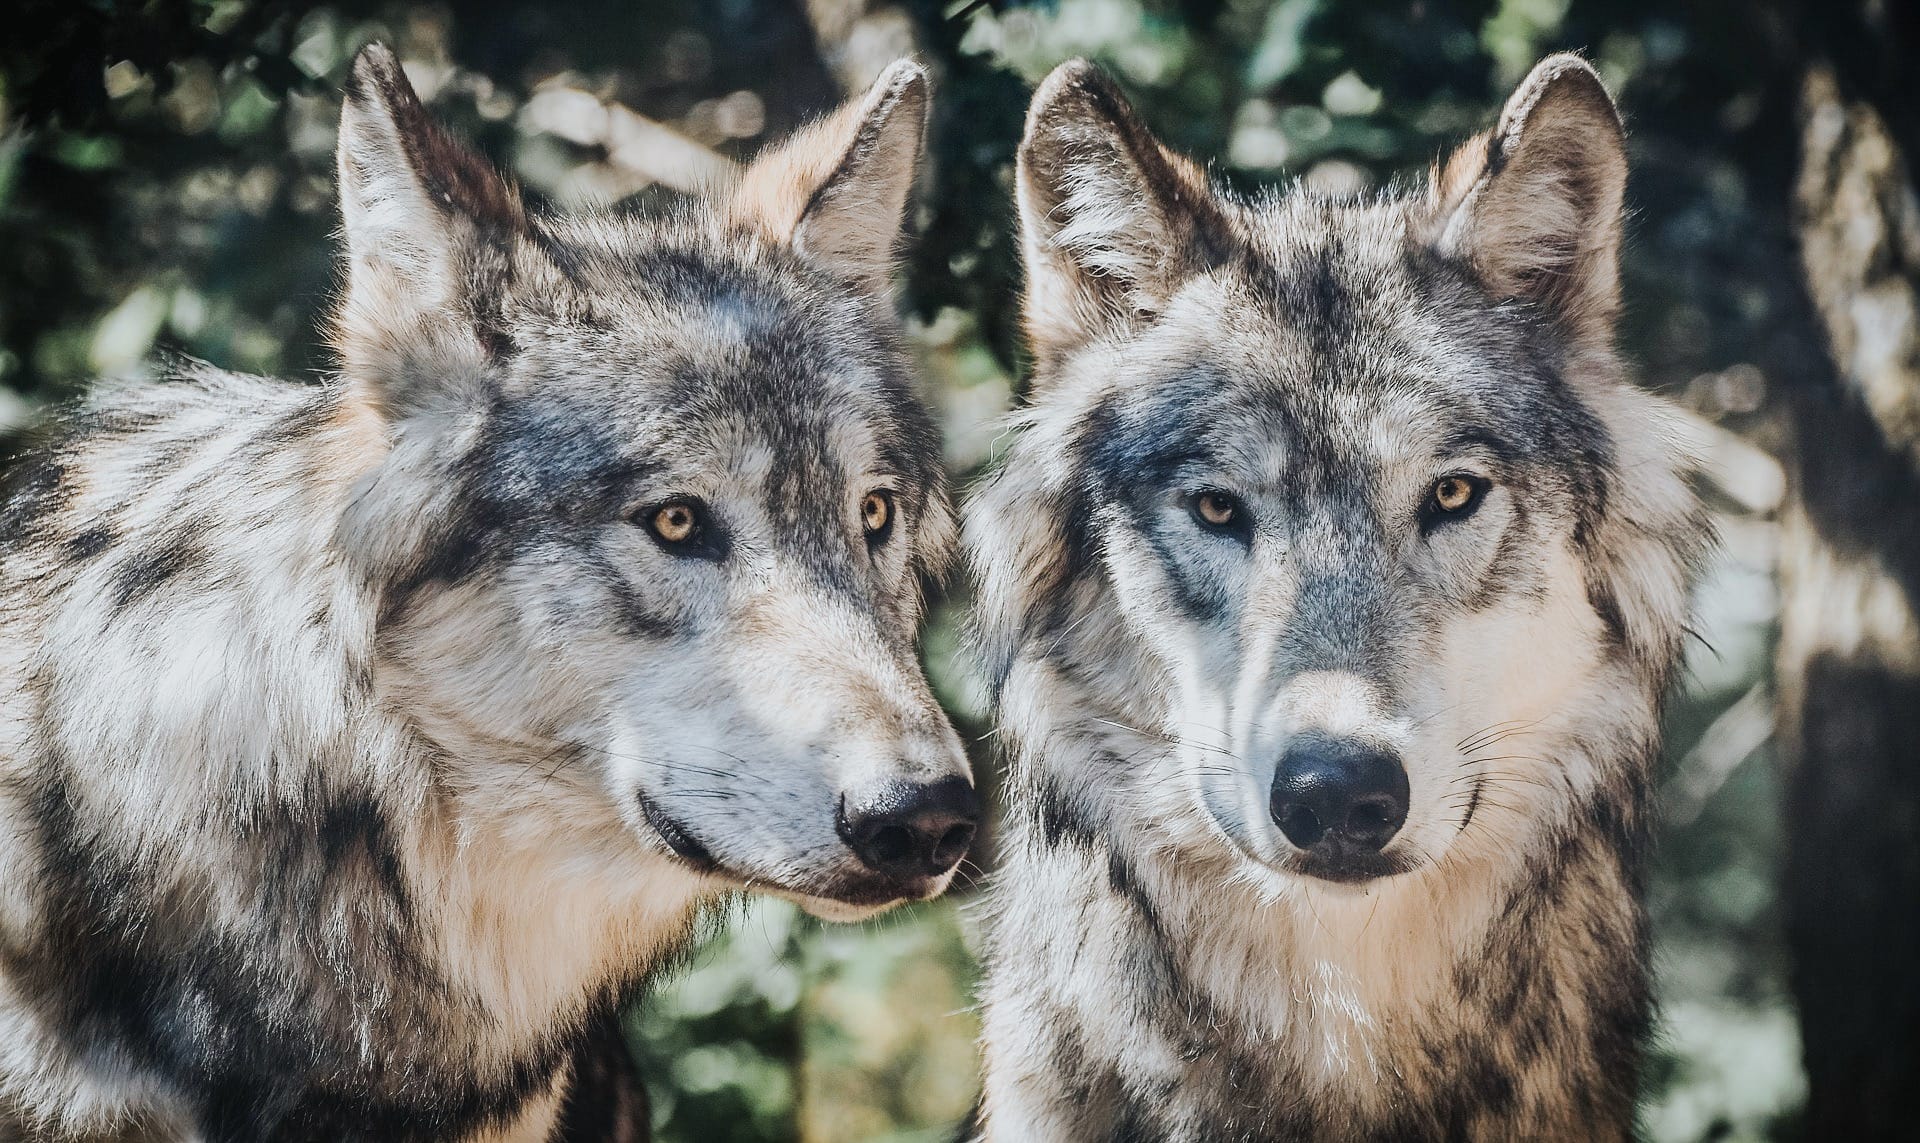 Take Action: Stop Ontario’s Plan to Increase Wolf & Coyote Hunting